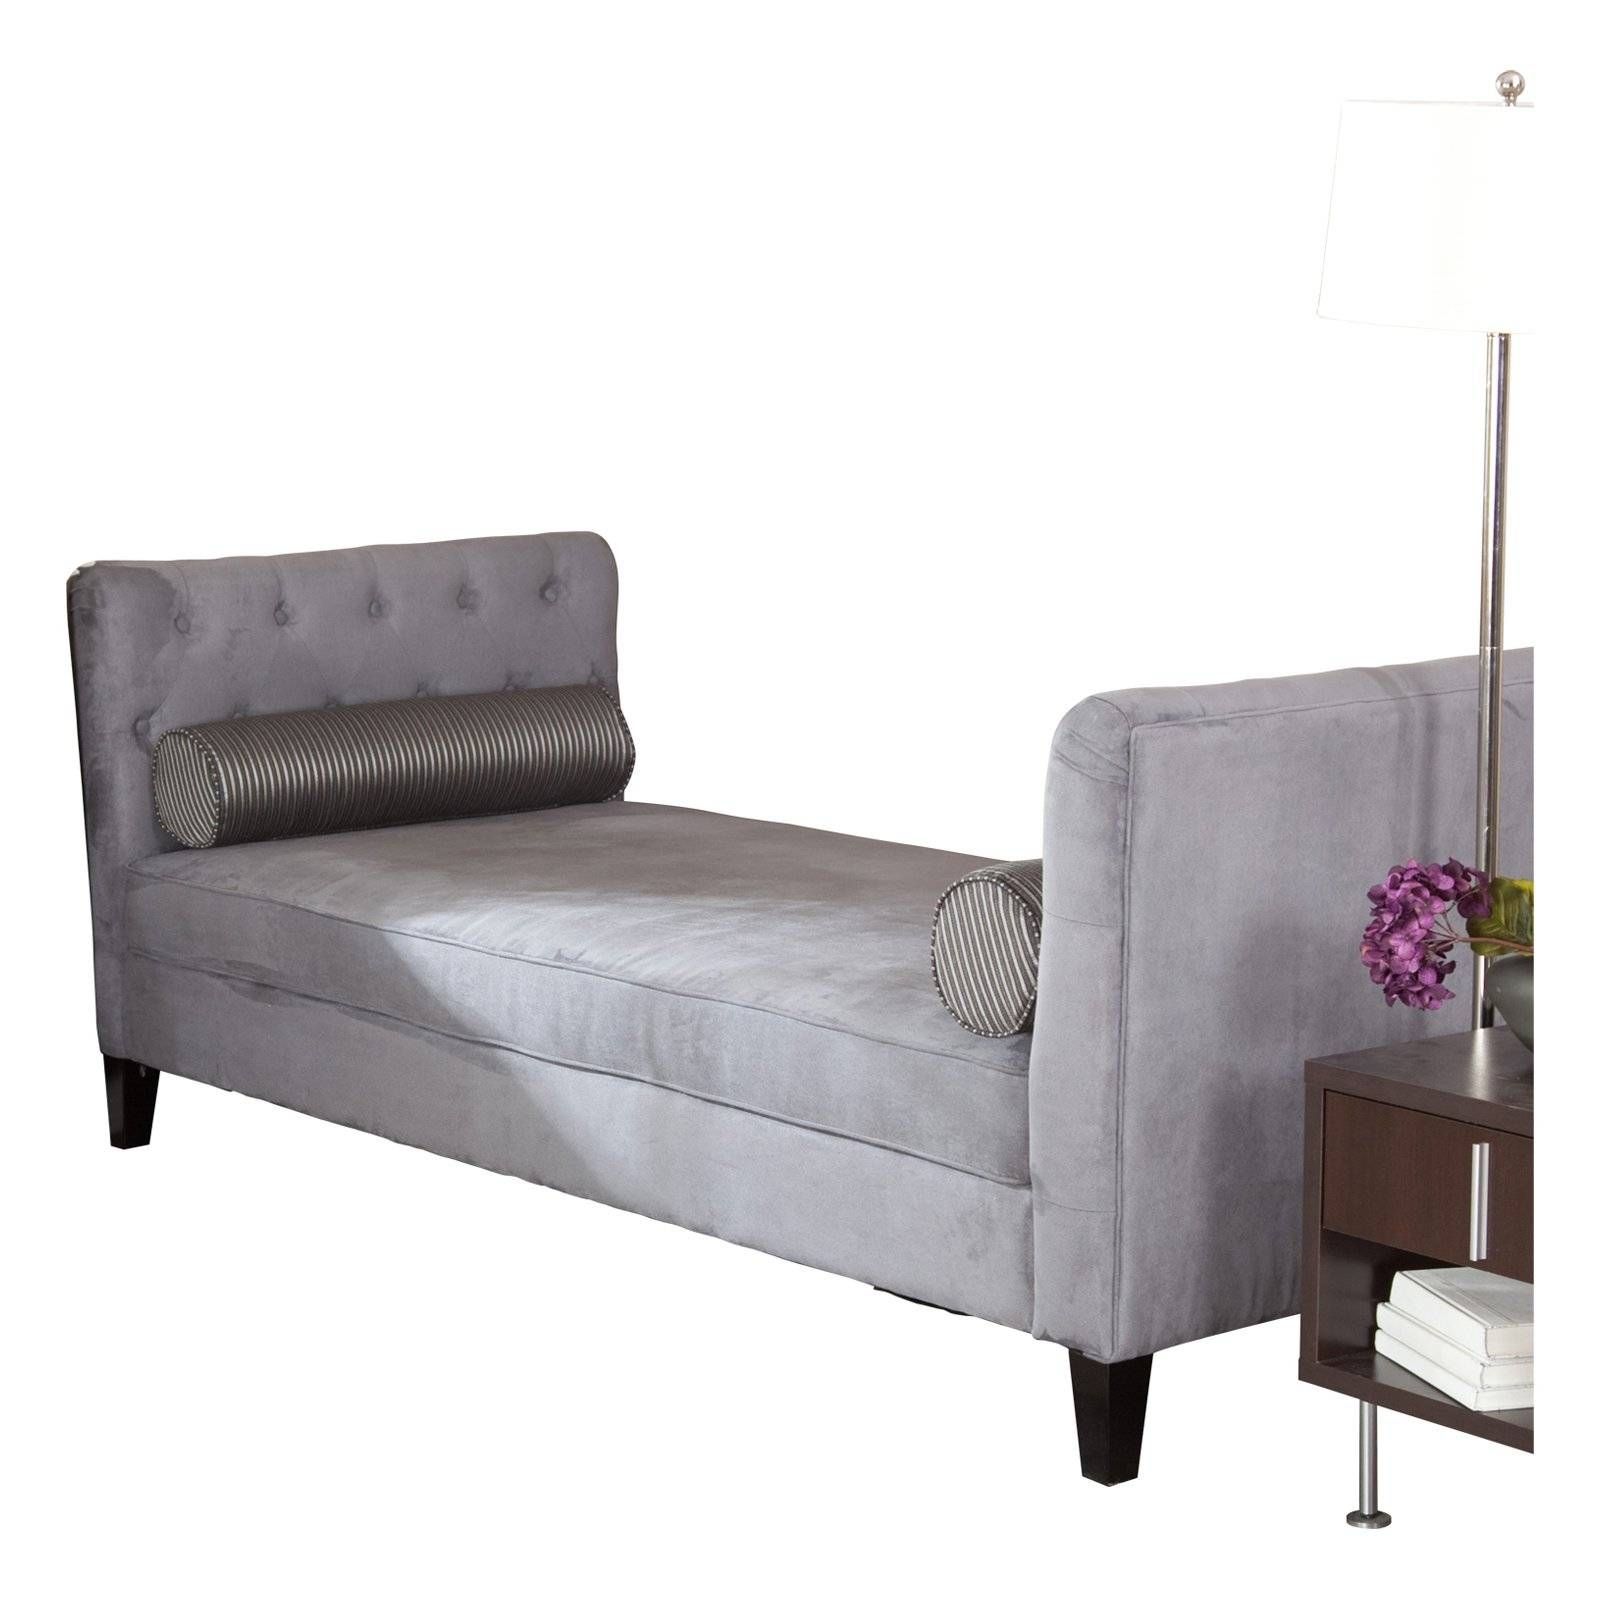 Furniture: Sensational Backless Couch Design Ideas Backless Daybed Pertaining To Backless Chaise Sofa (View 13 of 30)